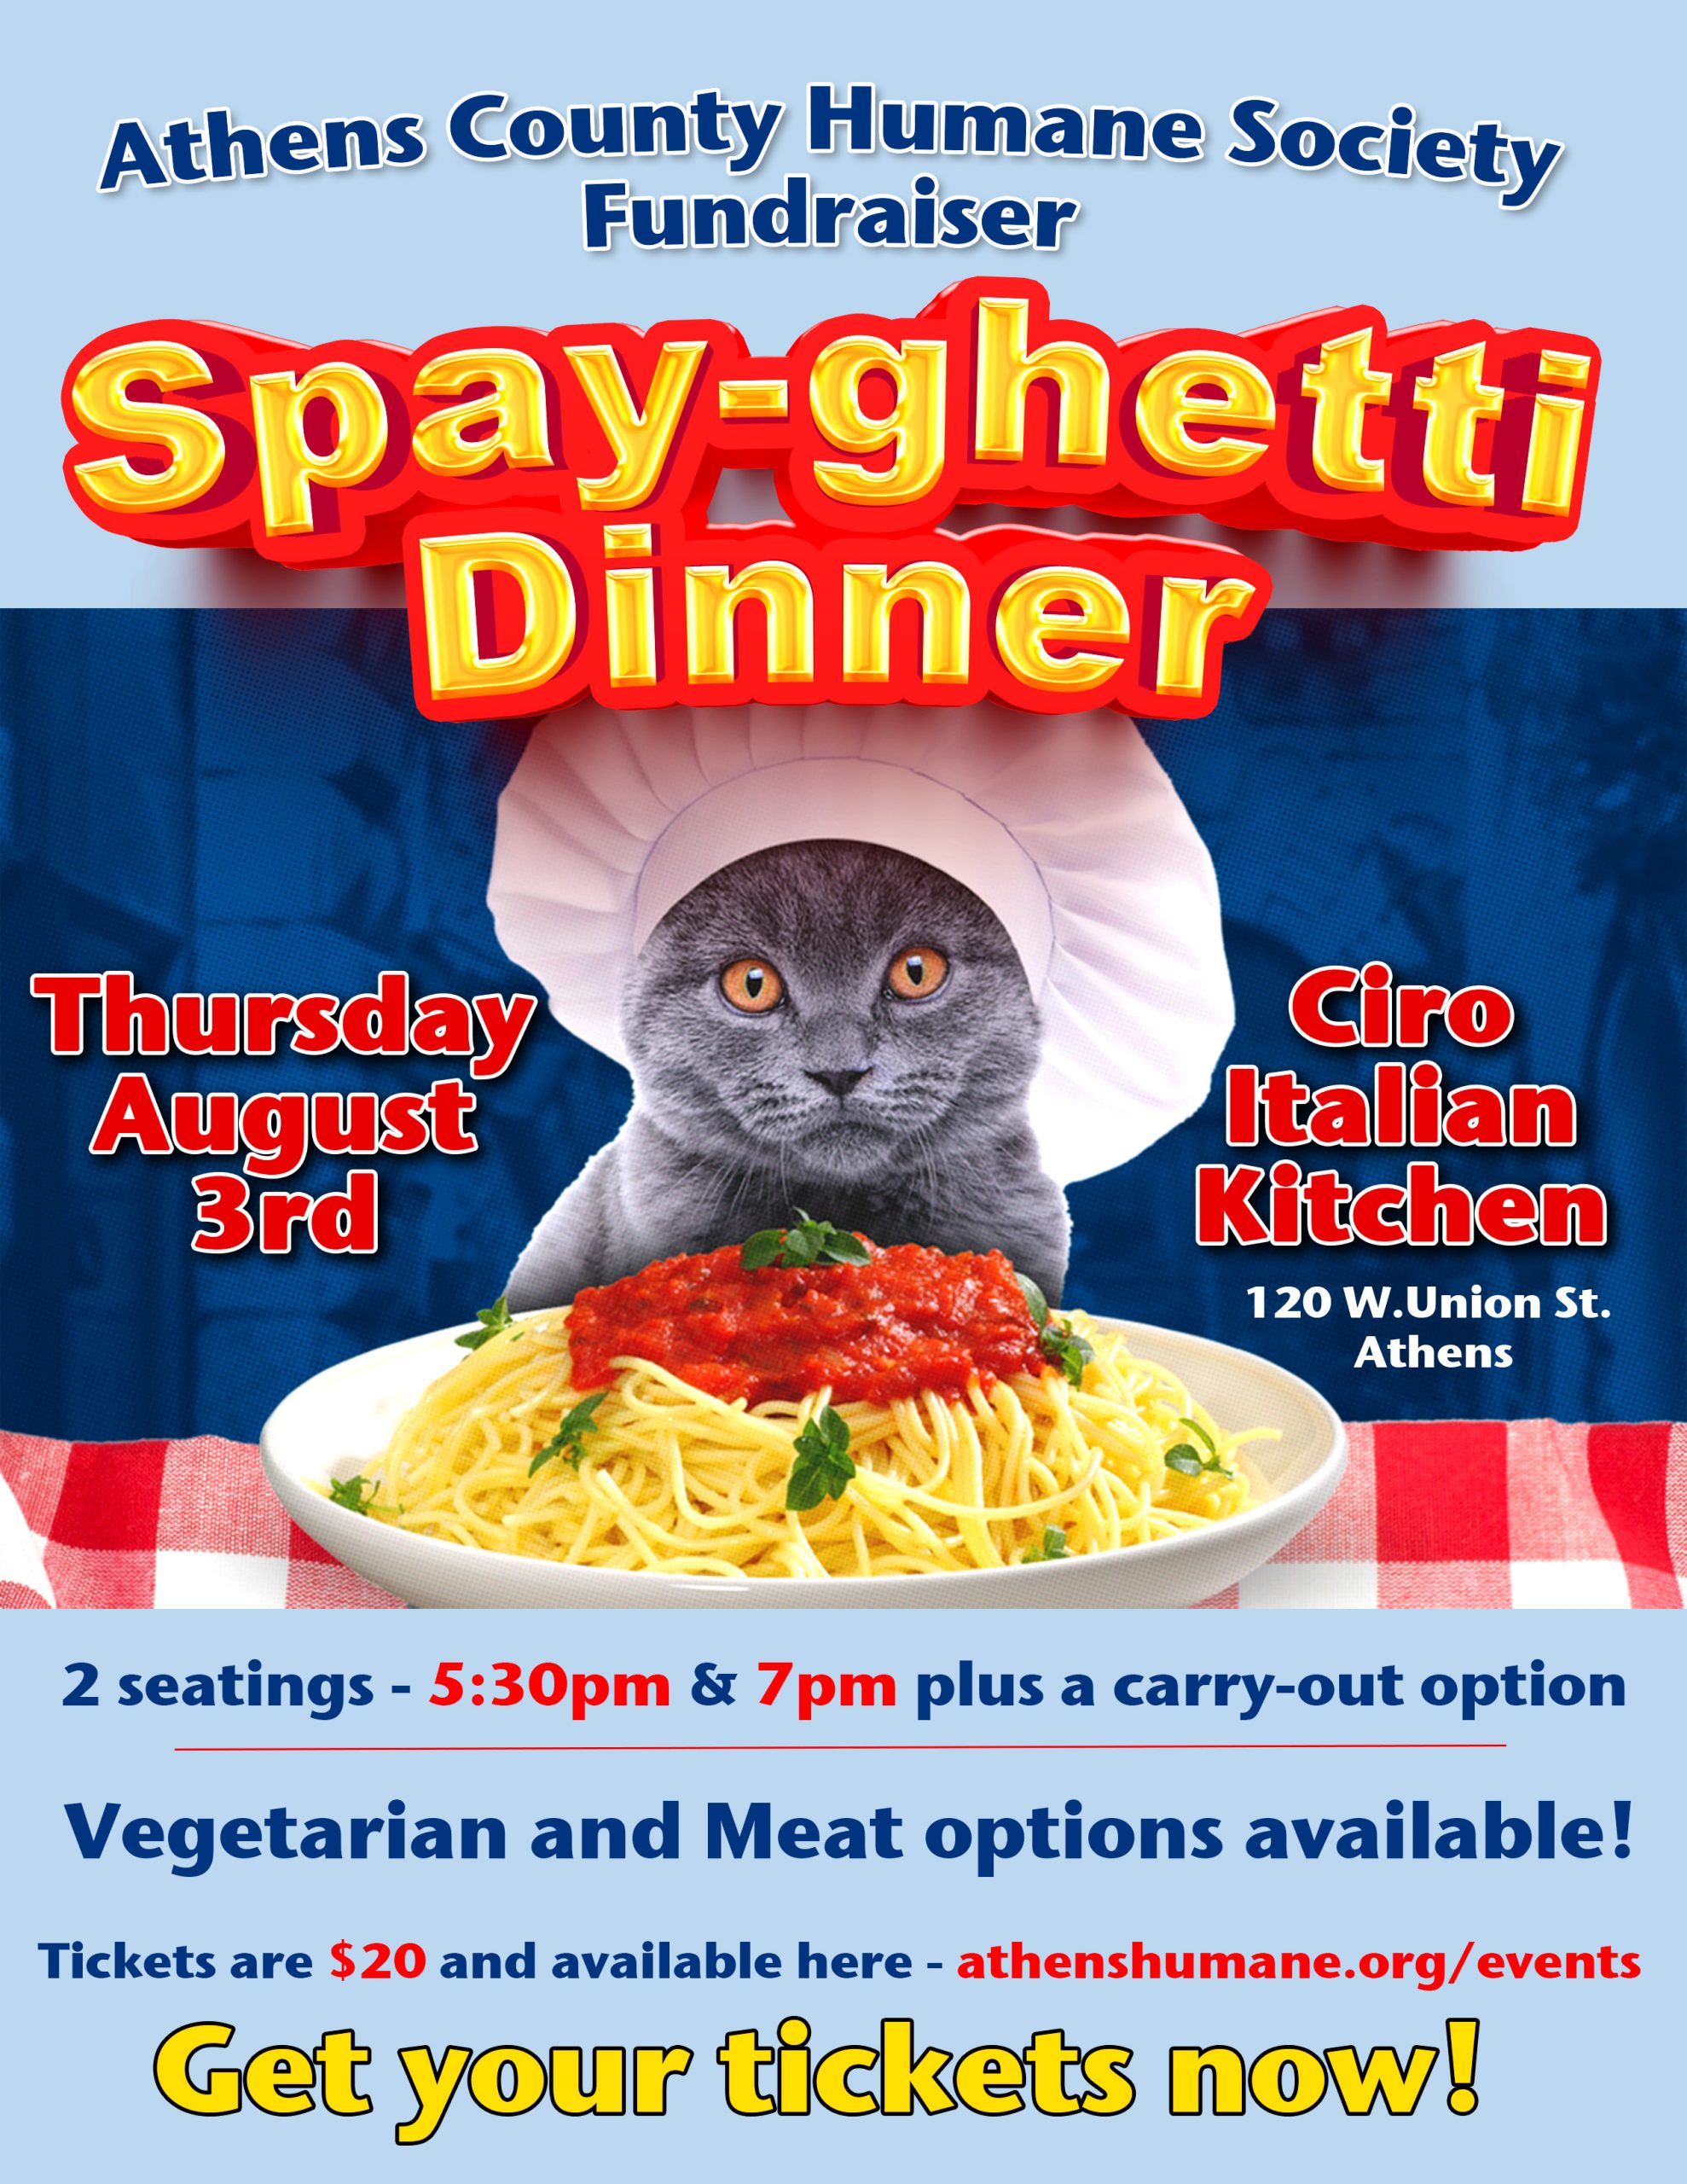 A flyer for the Athens County Human Society's Spay-ghetti fundraiser dinner. The central image is a grey cat with a chef's hat in front of a plate of spaghetti.